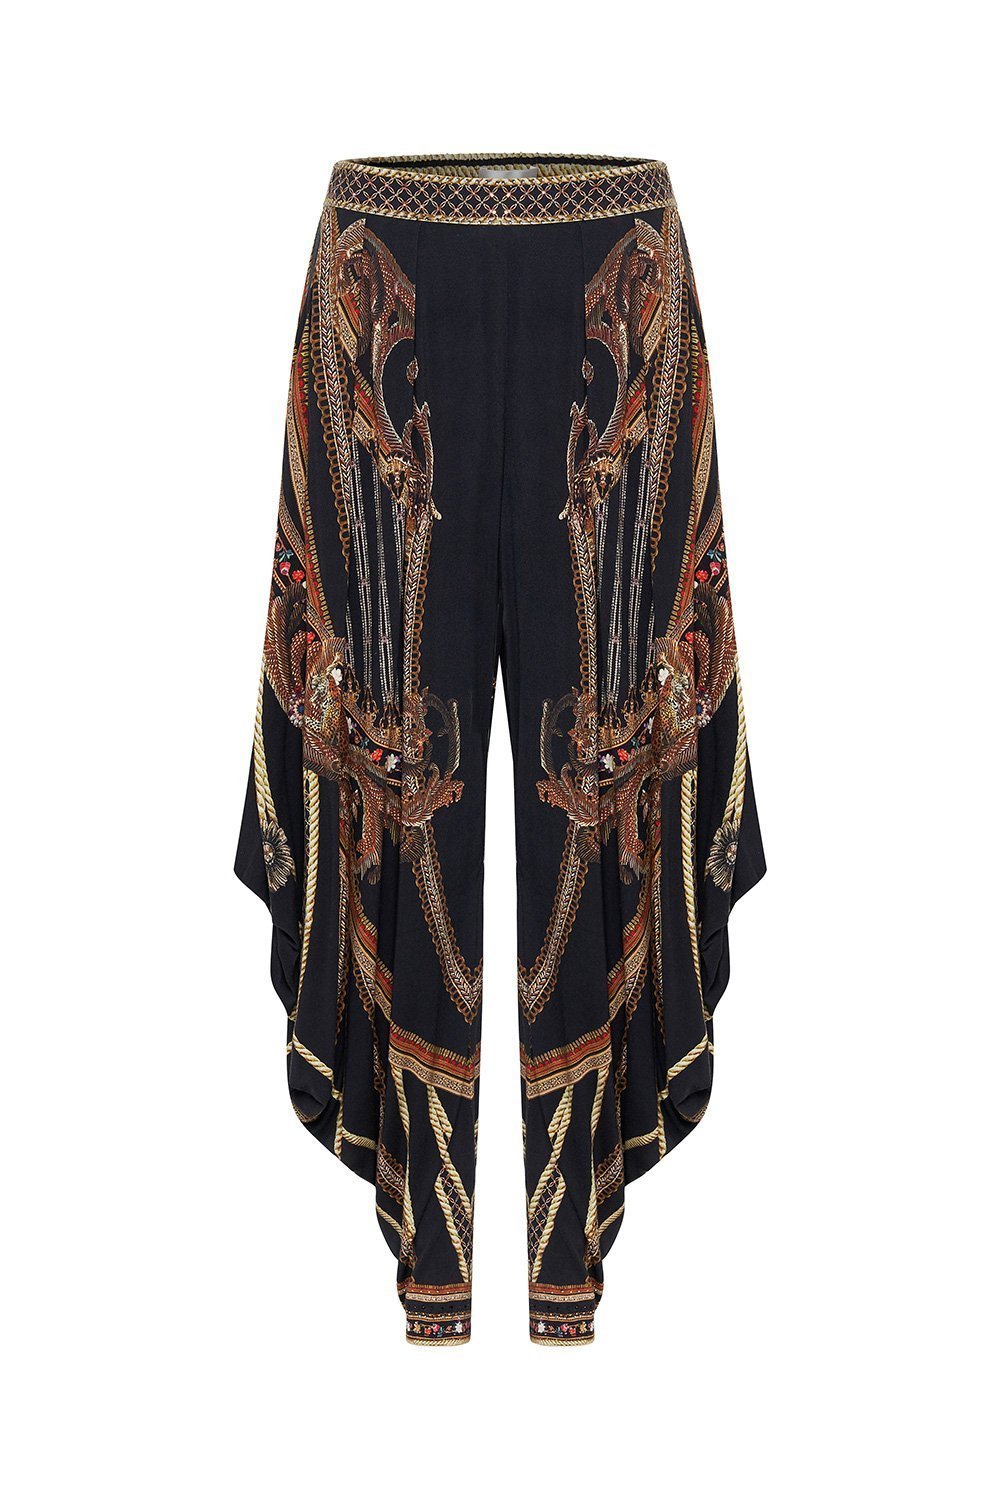 JERSEY DRAPE PANT WITH POCKET BELLE OF THE BAROQUE